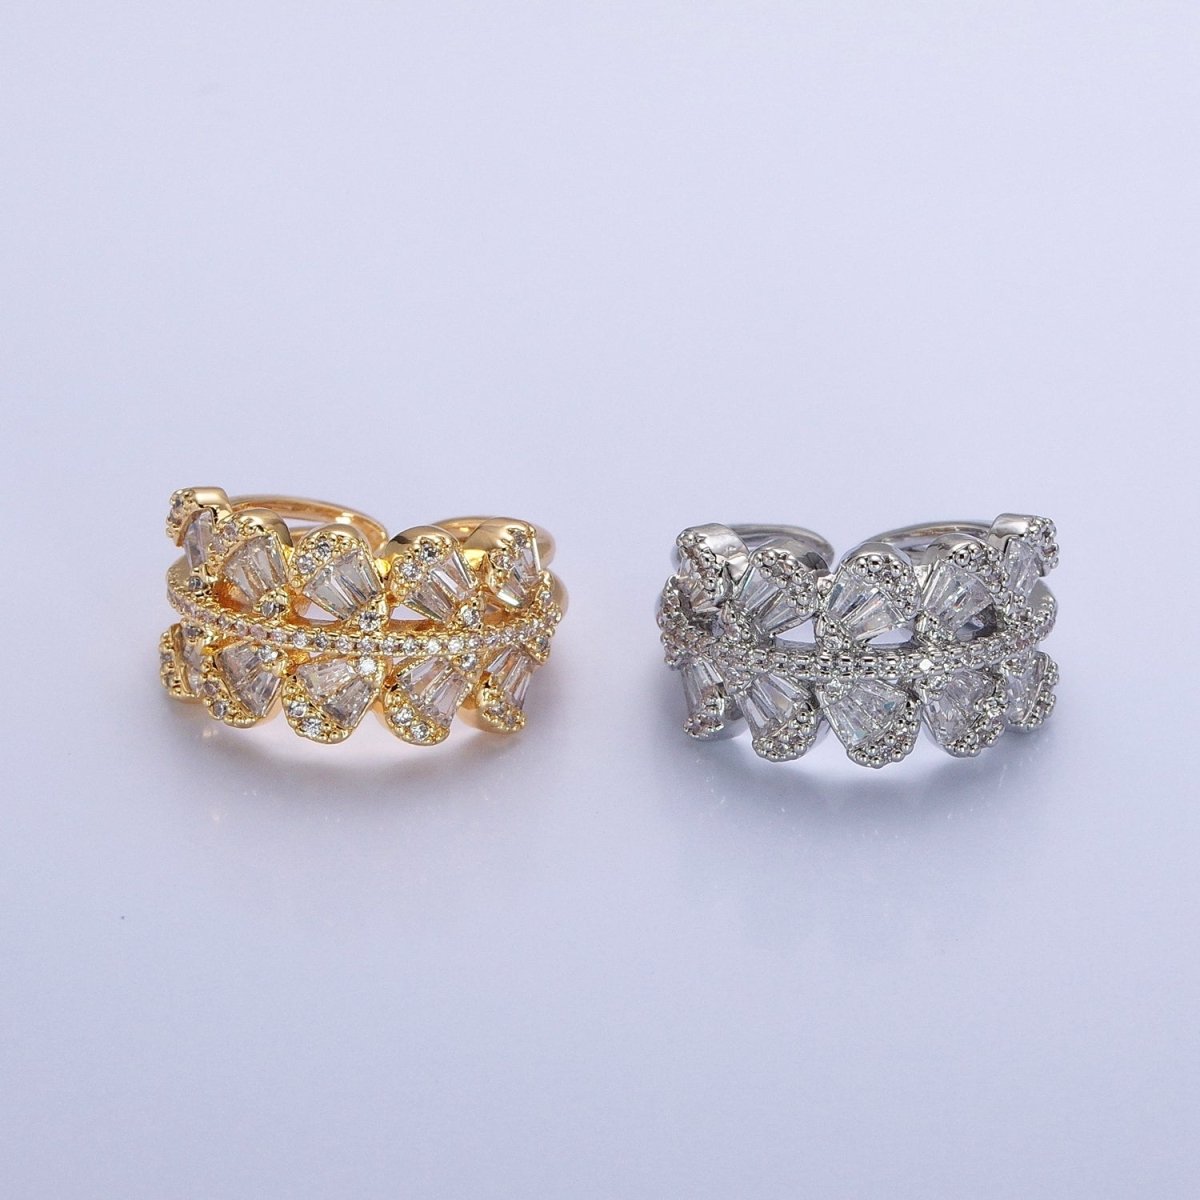 24K Gold Filled Micro Paved Baguette Geometric Triple Band Ring in Gold & Silver | O-1551 O-1552 - DLUXCA